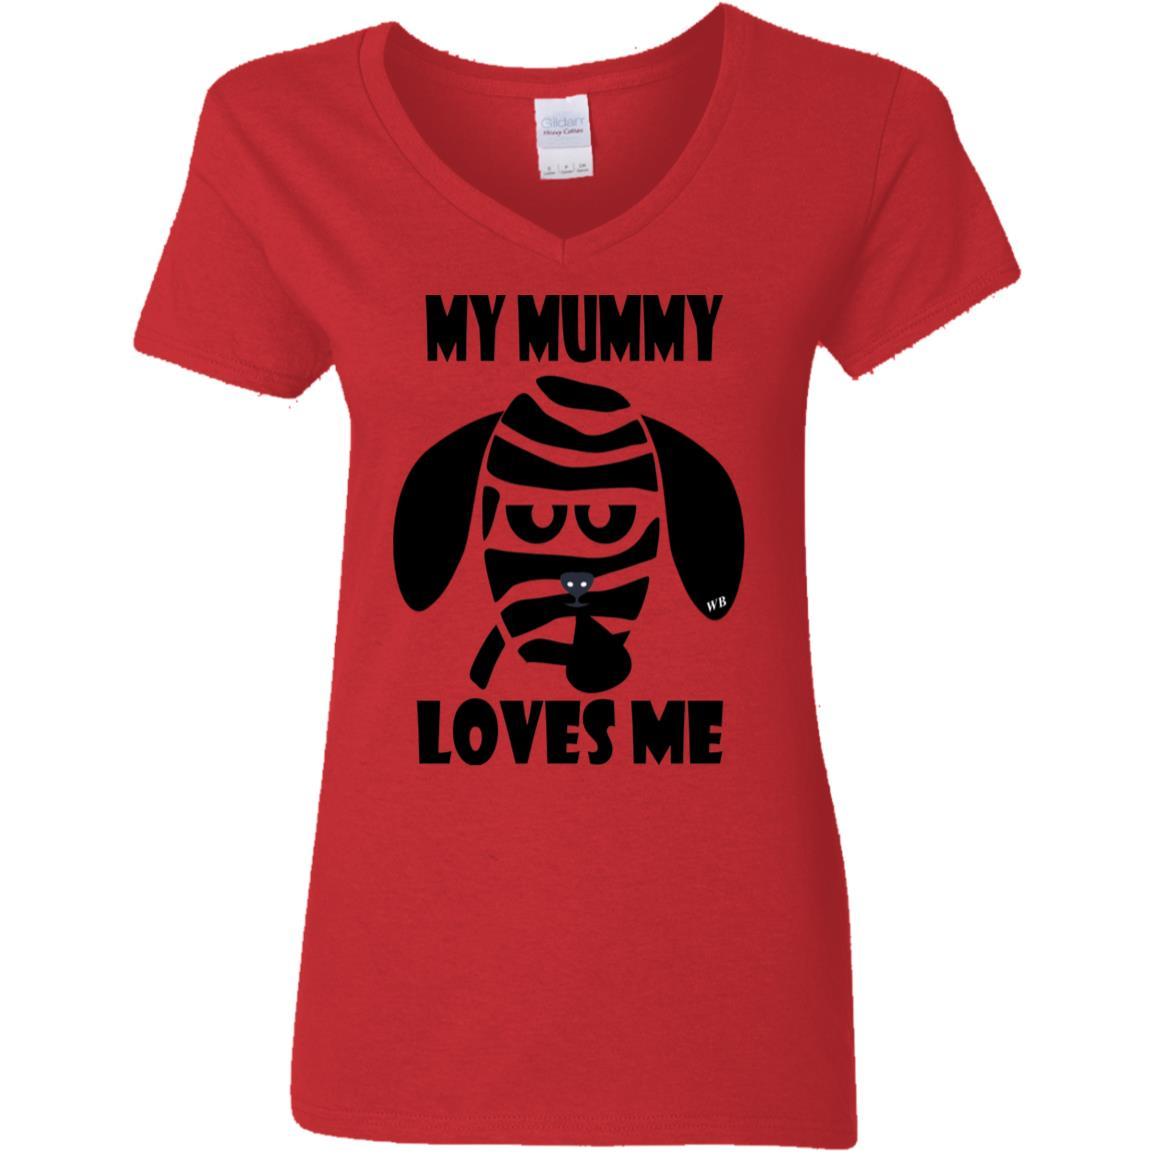 T-Shirts Red / S WineyBitches.Co "My Mummy Loves Me" Halloween Ladies' 5.3 oz. V-Neck T-Shirt WineyBitchesCo